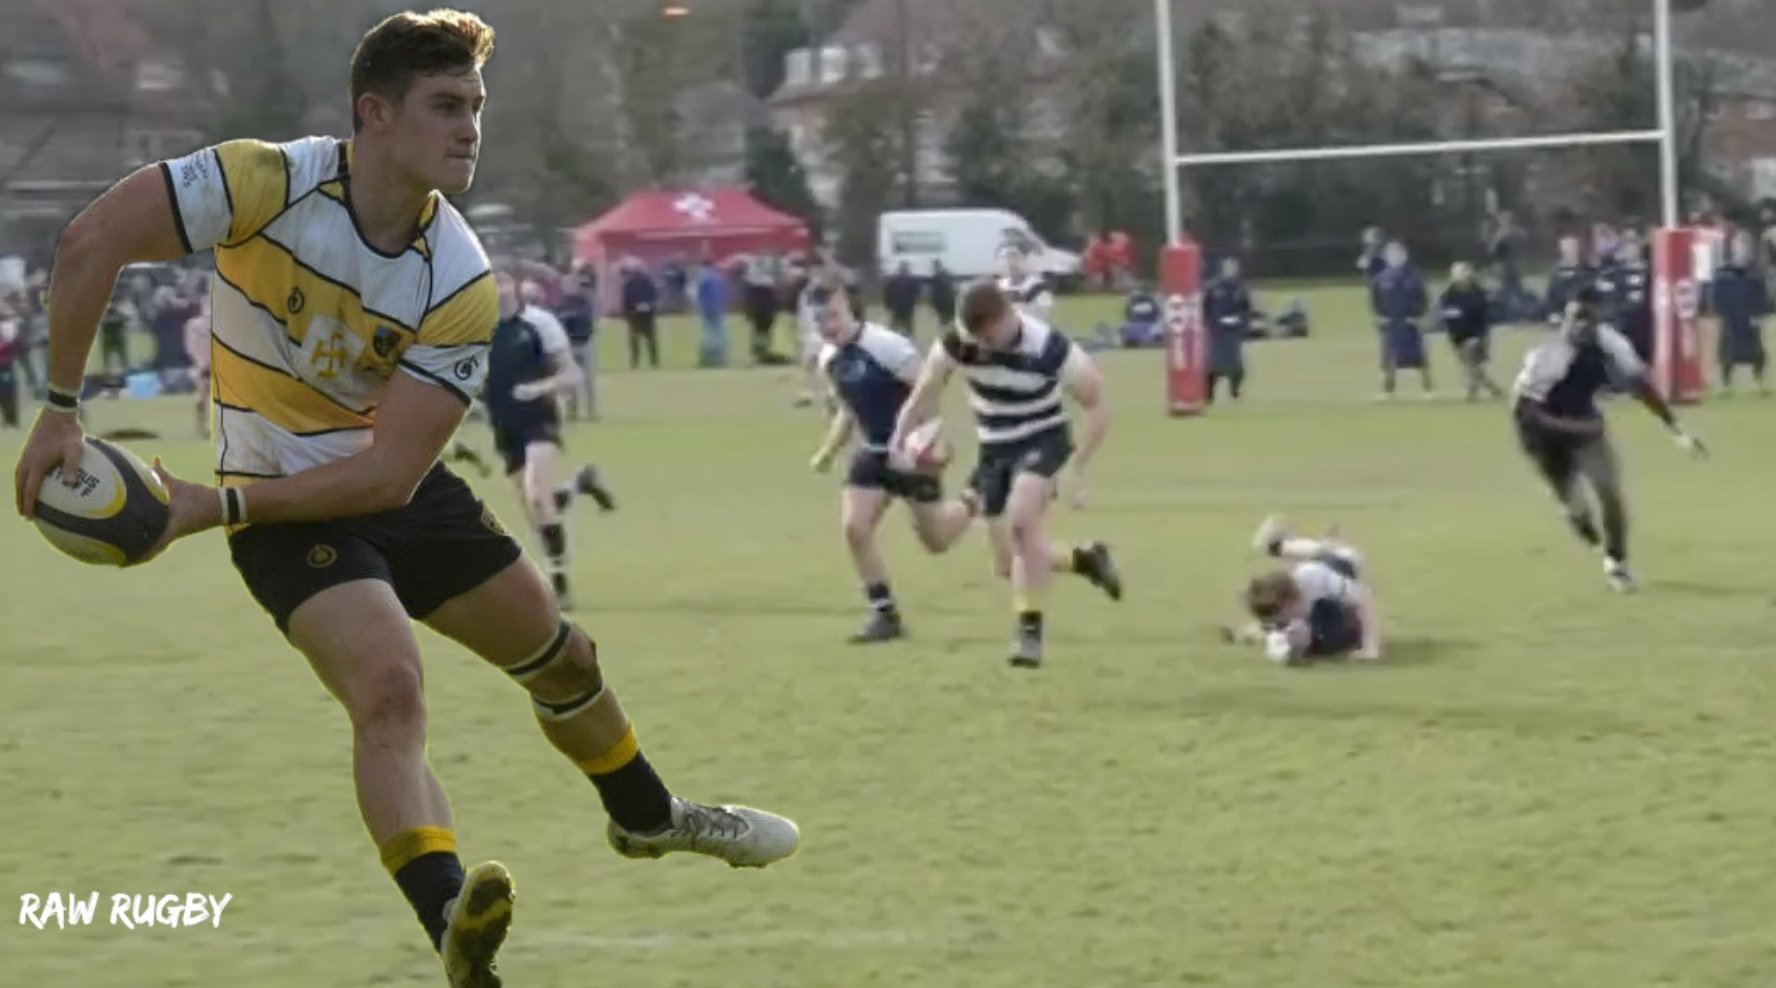 RAW RUGBY: 18-year-old schoolboy montage highlights the vast amount of talent emerging in English rugby